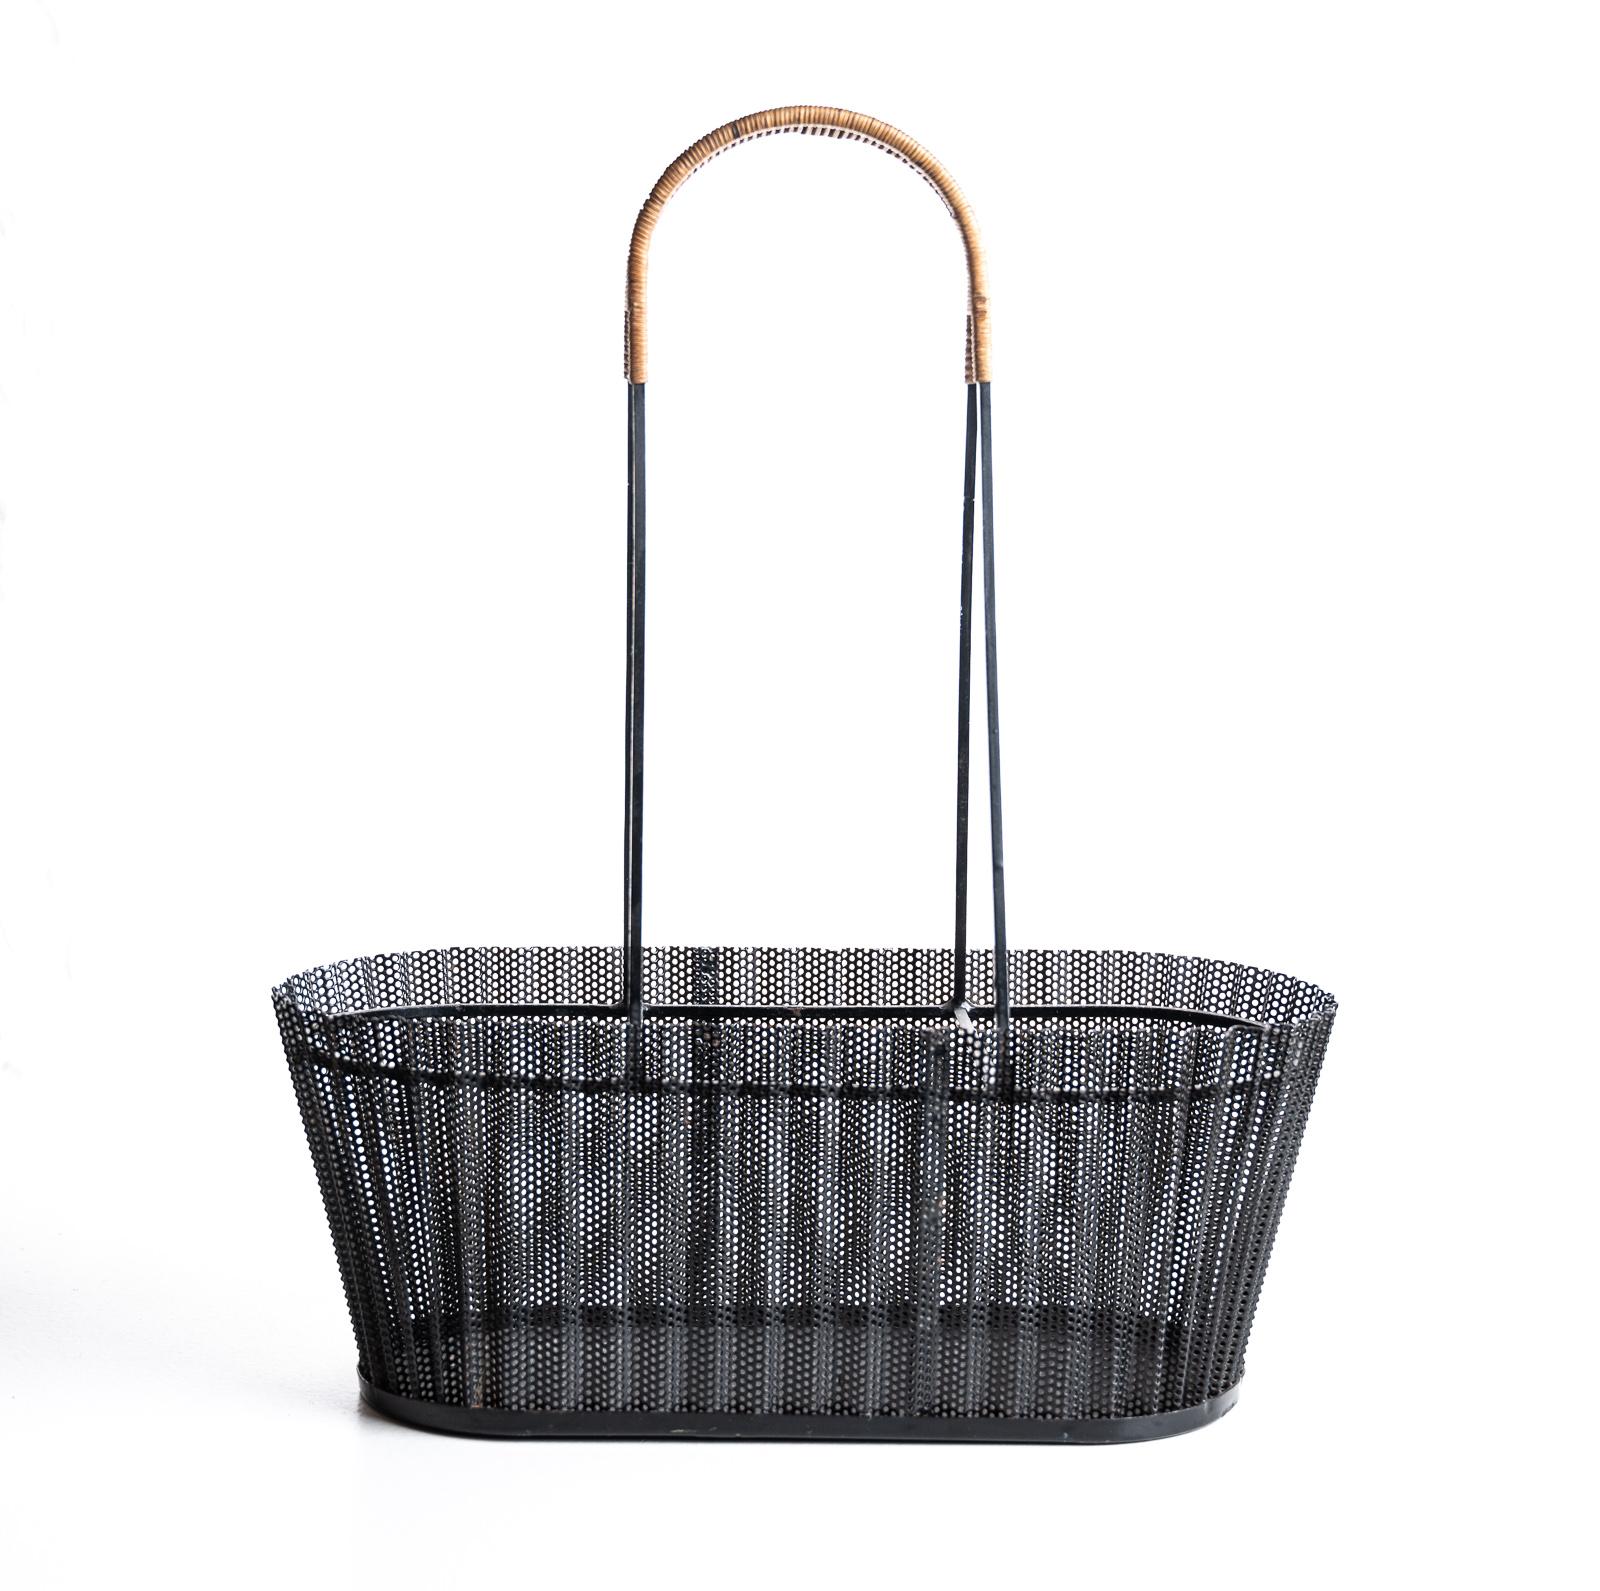 A rare Mathieu Matégot liquor basket with a wicker handle perforated metal, original black paint. In excellent original condition.

documentation: this version on page 12 of the documentation archive pages, Mathieu Matégot by Patrick Favardin,